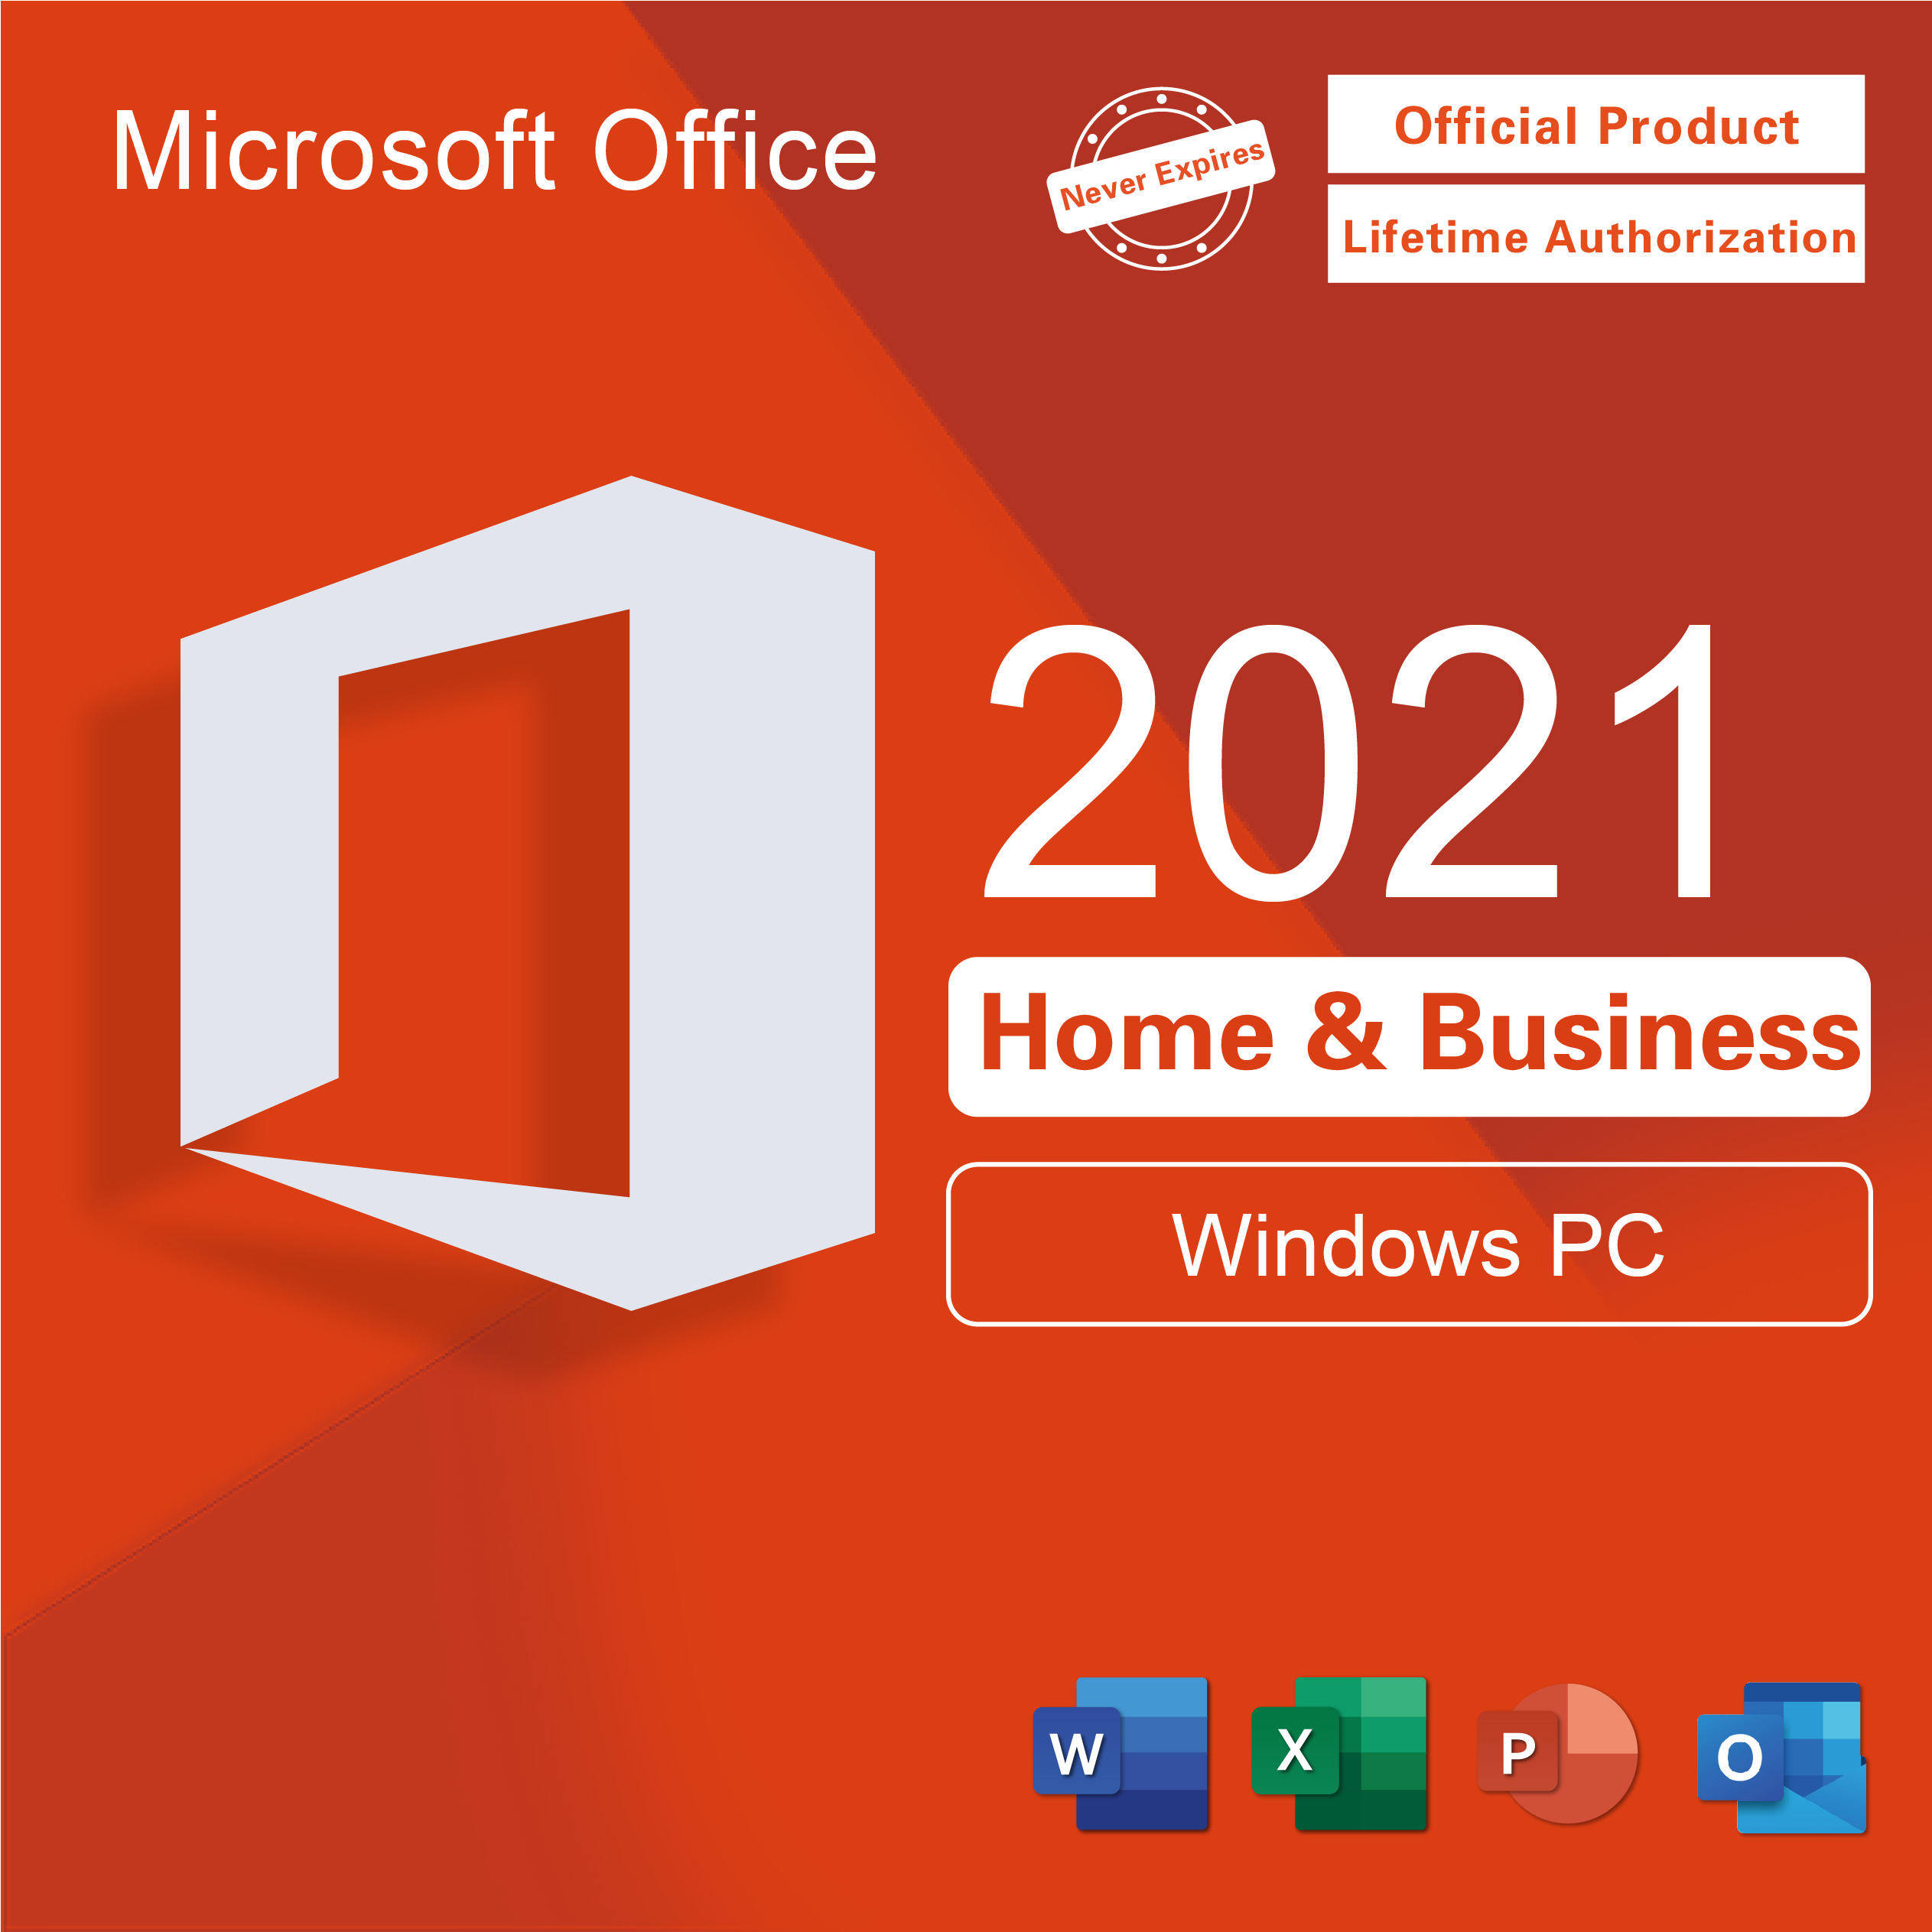 Microsoft Office 2021 Home & Business 